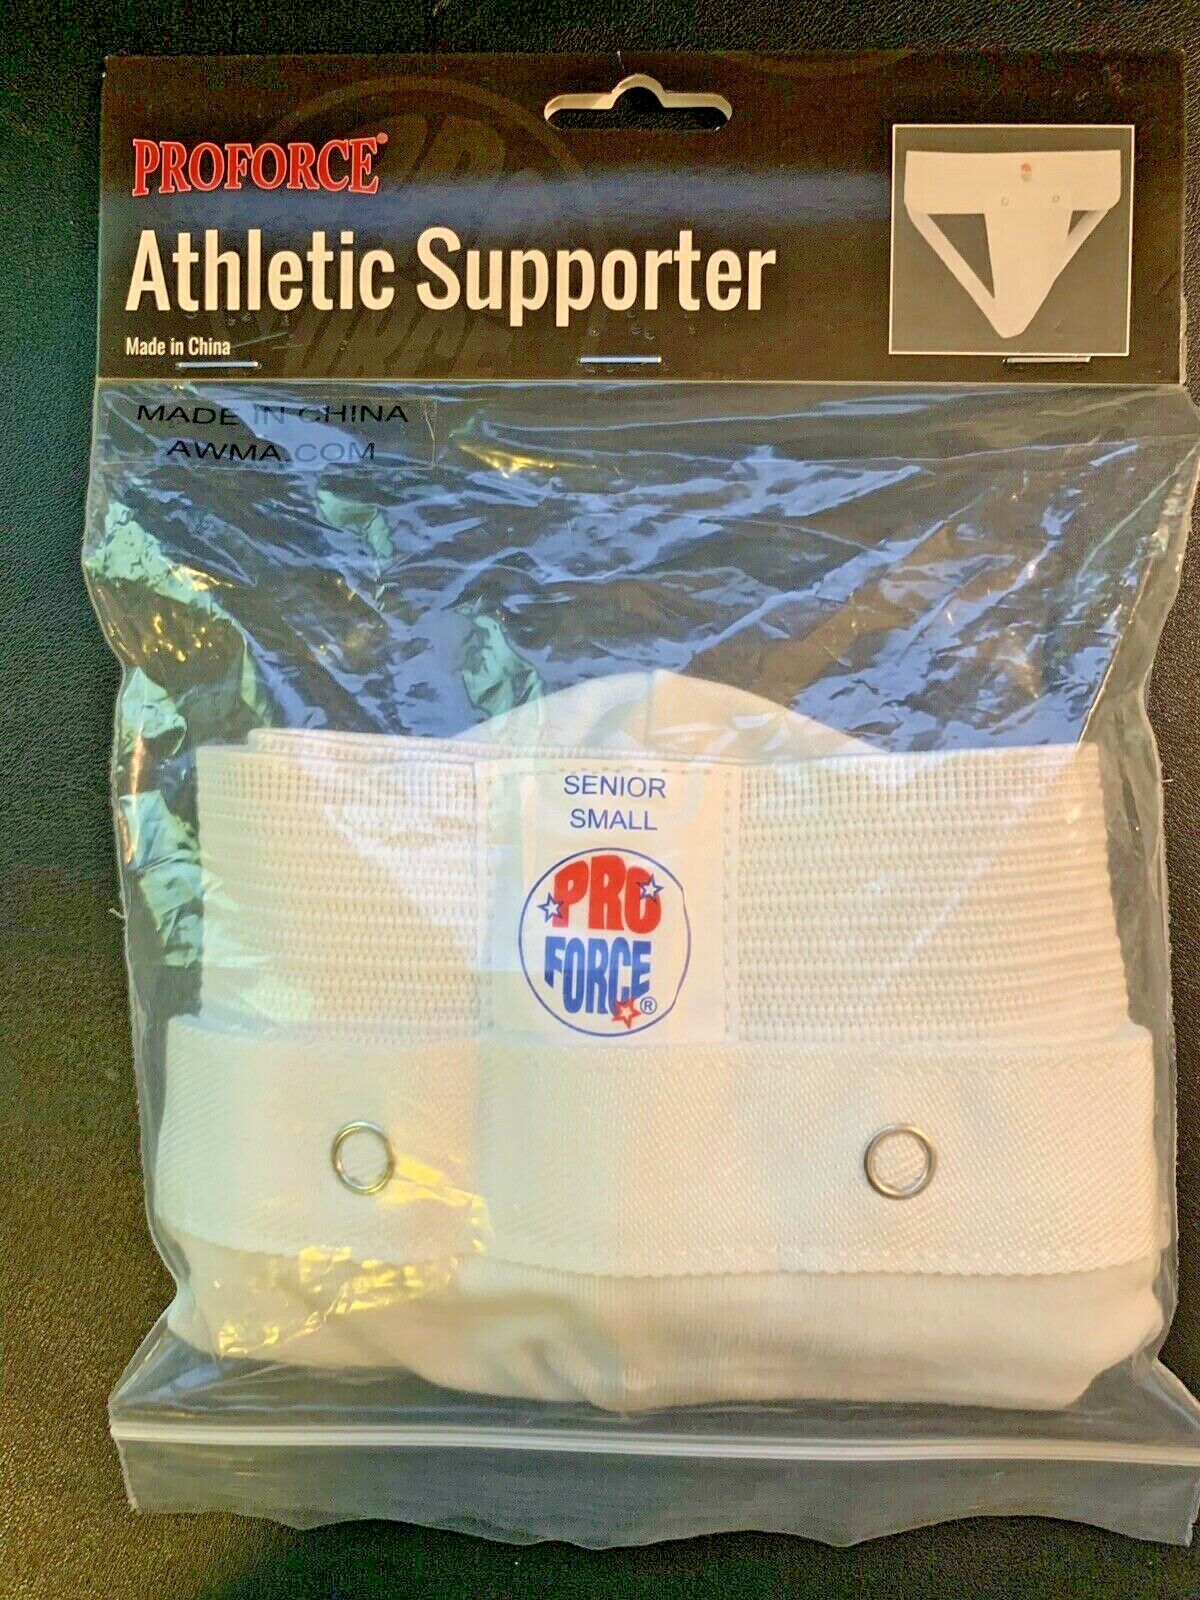 Junior Small Large Male Boys Proforce Athletic Supporter Protective Gear New